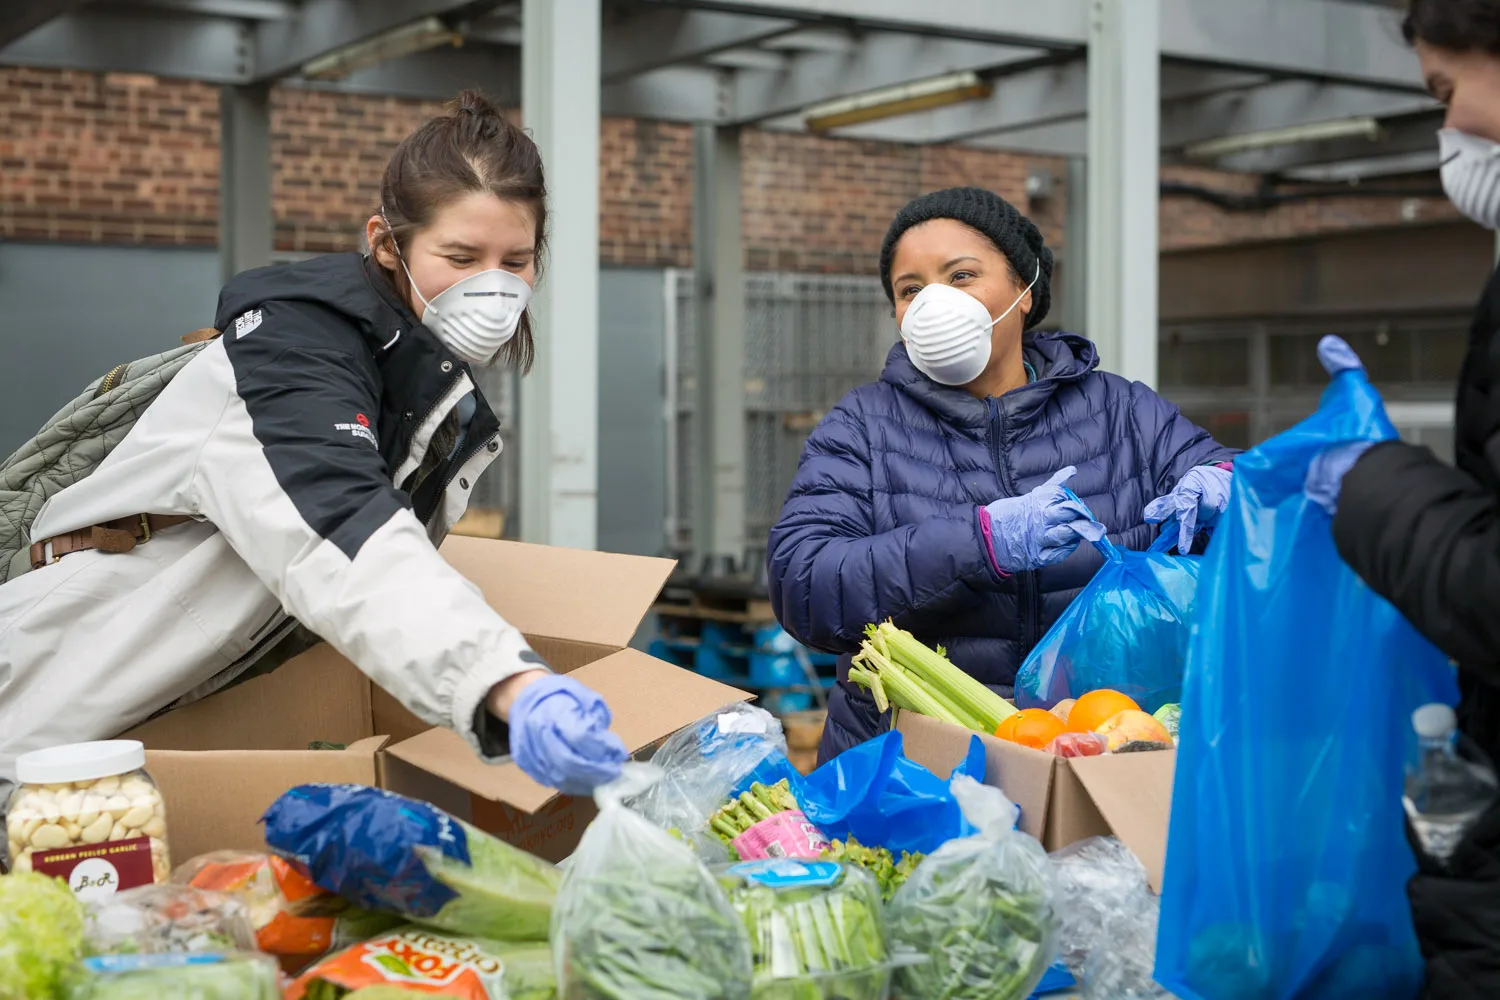 Two people volunteering to package emergency food and resources in an outdoor distribution setting.